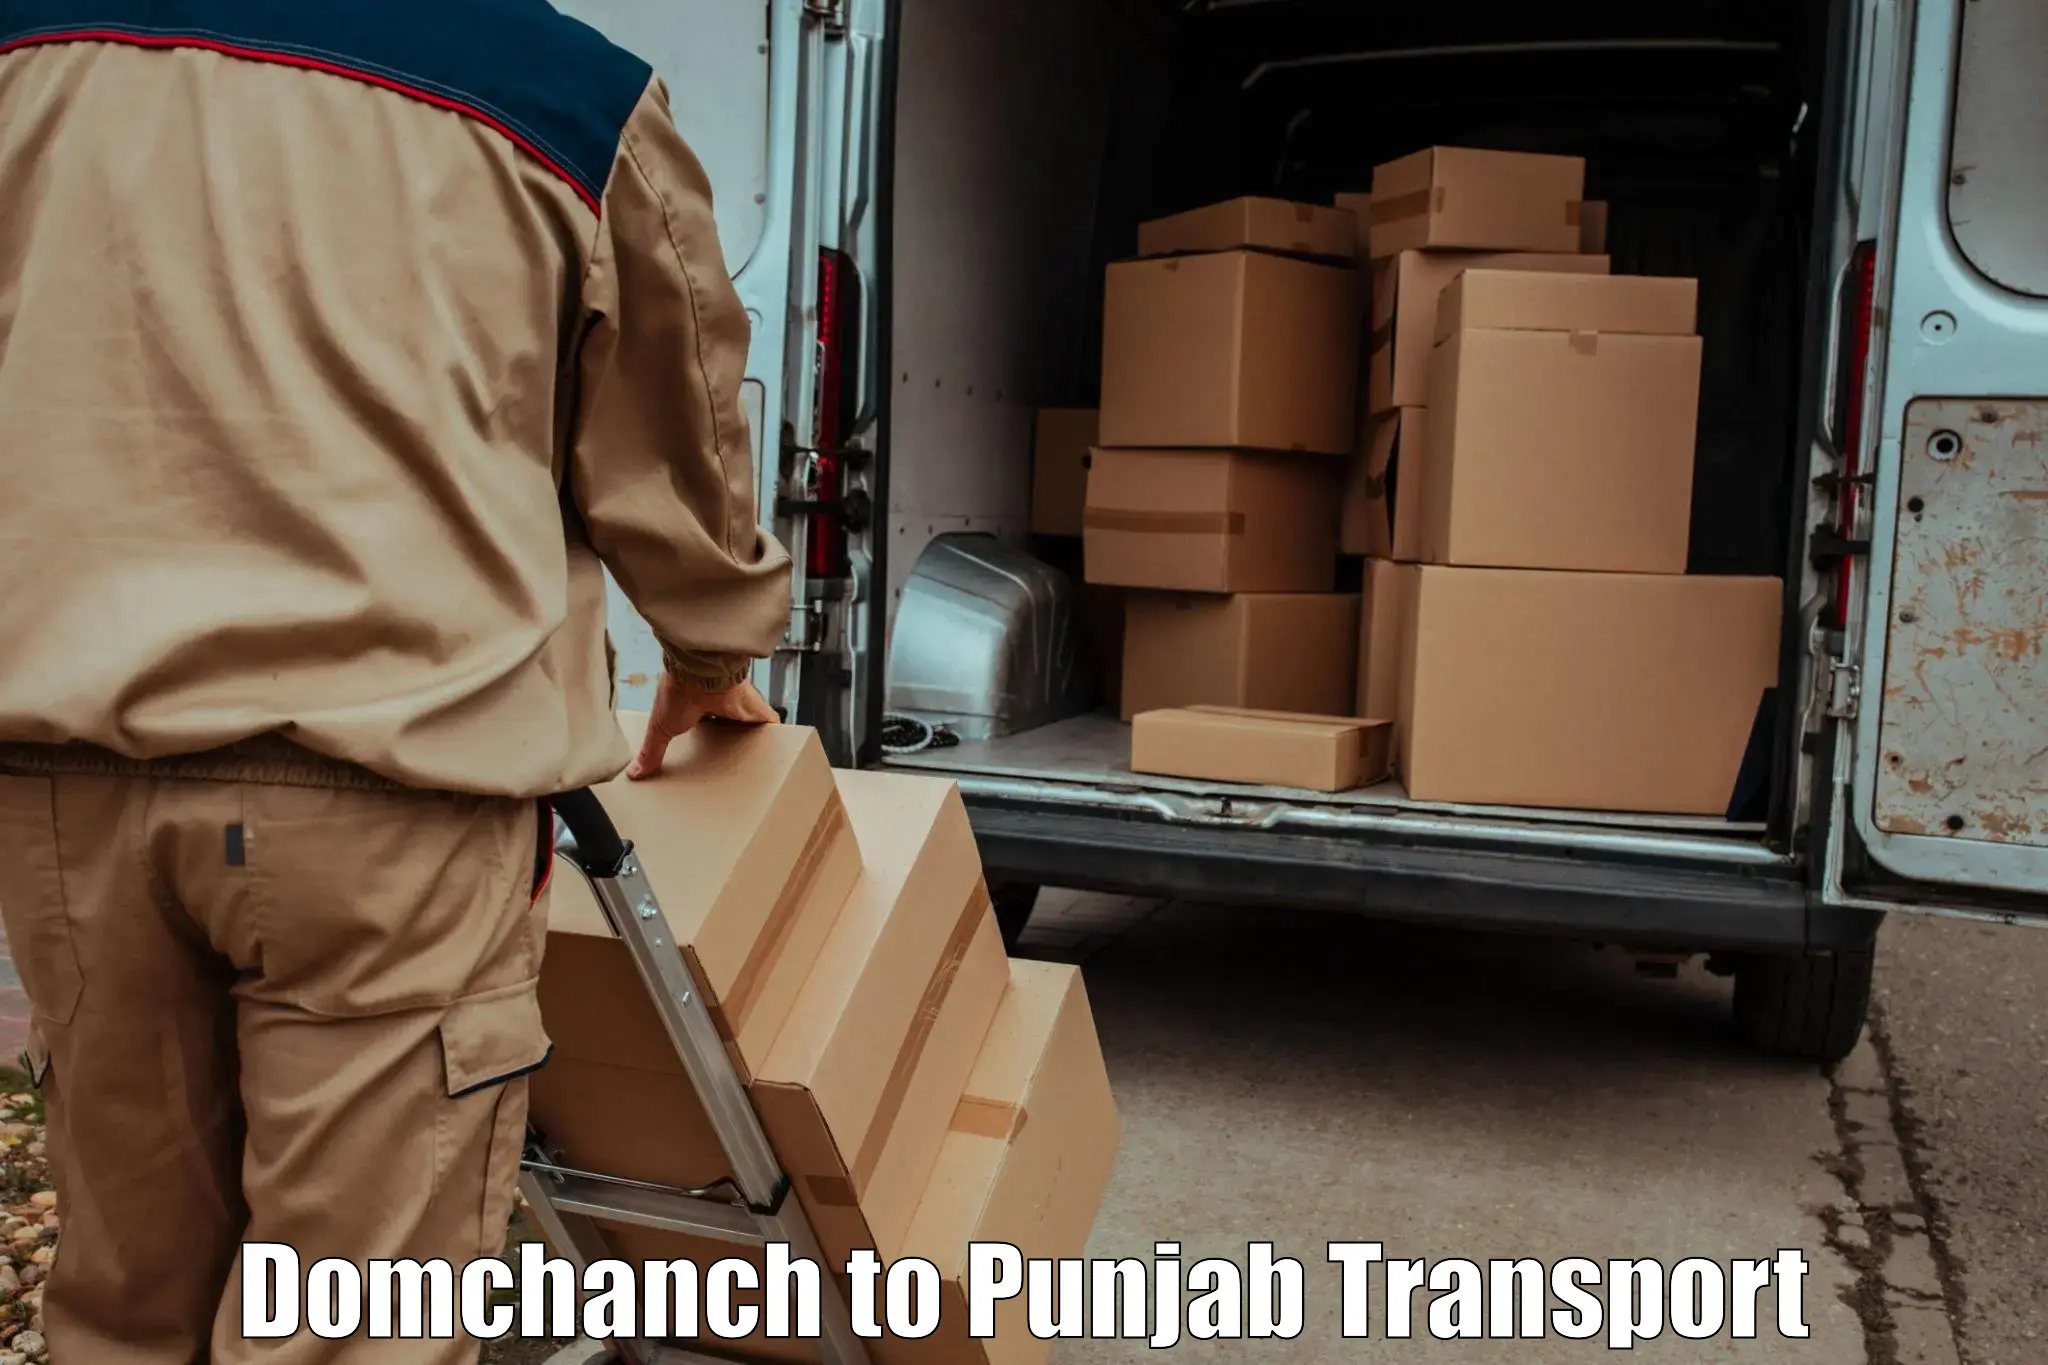 Container transport service Domchanch to Raikot